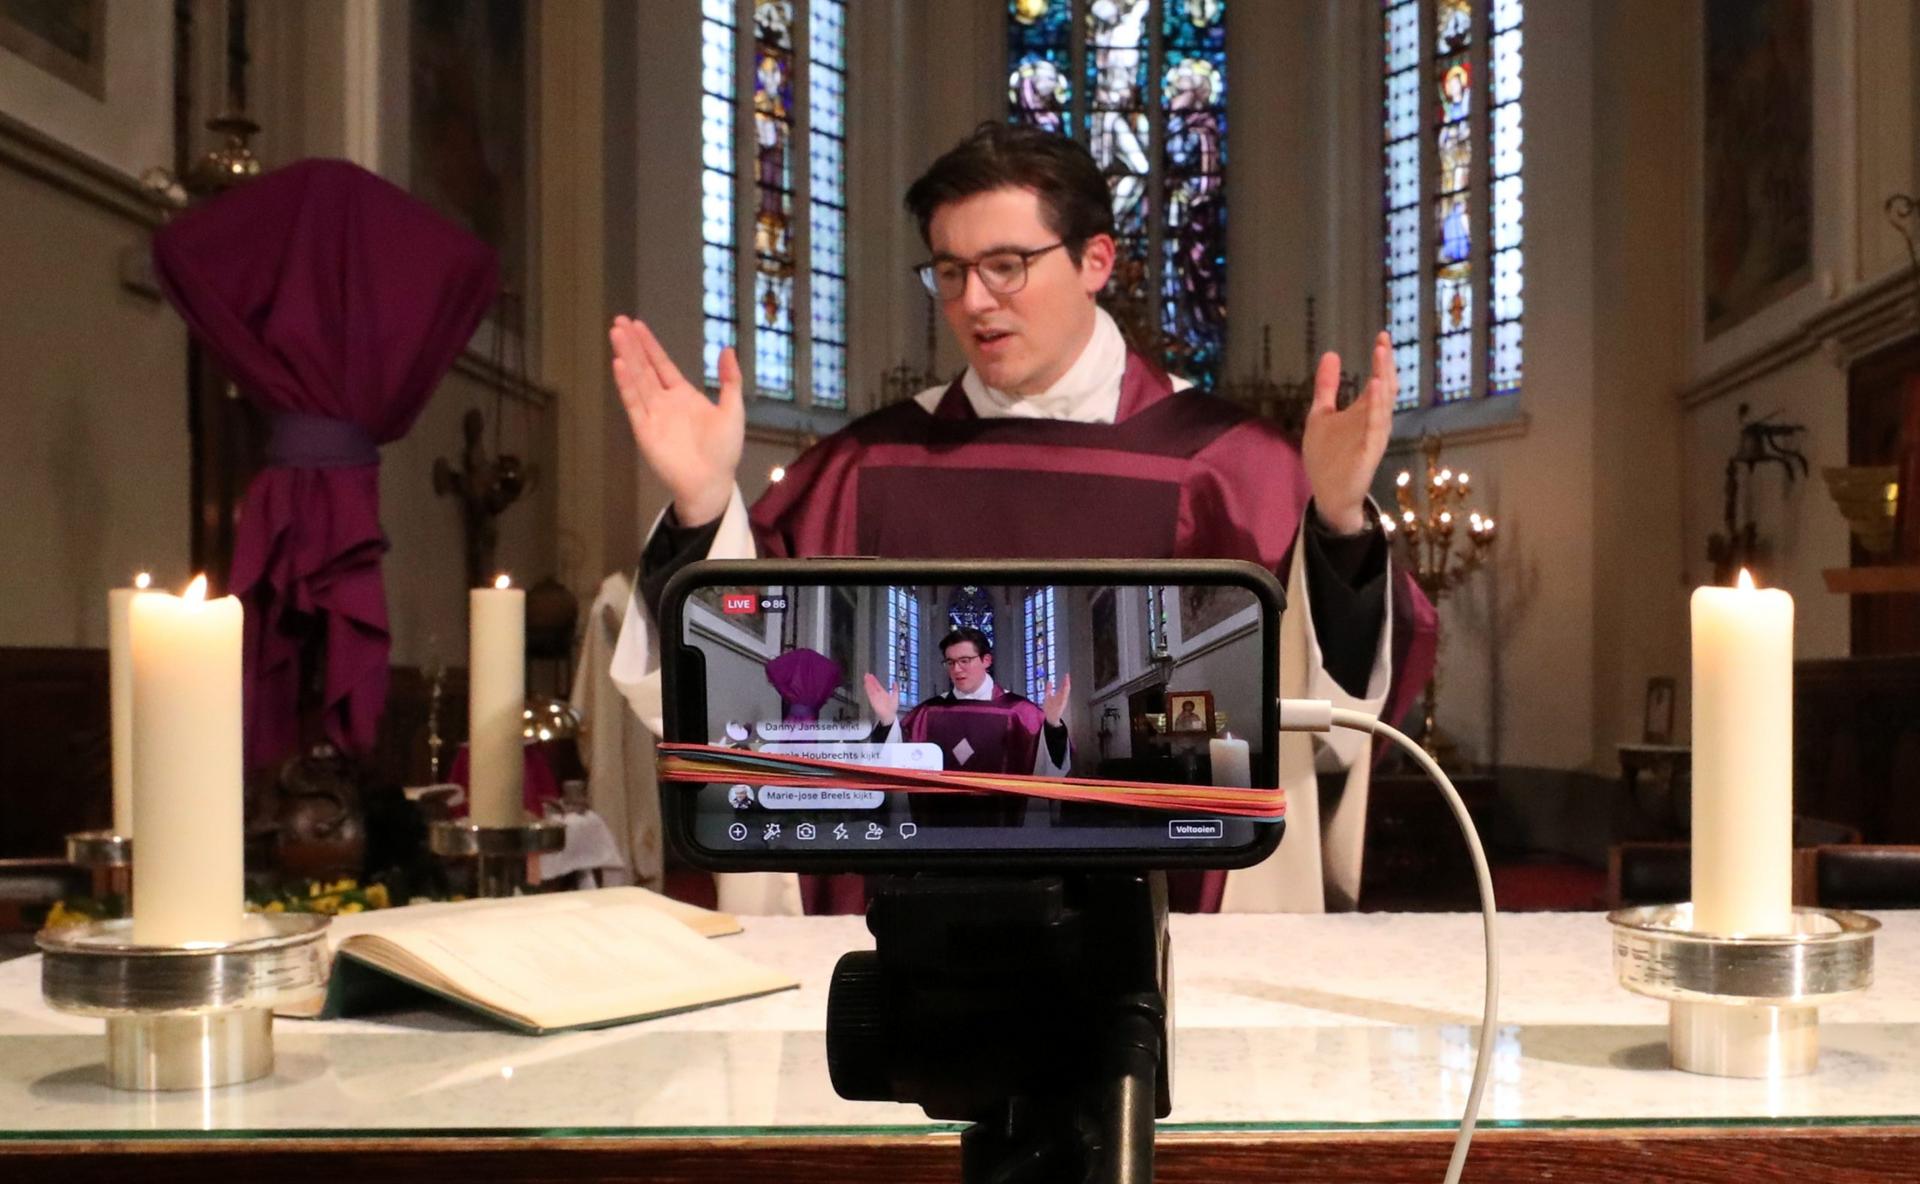 Liturgists say online Mass is fine, but no substitute for the real thing